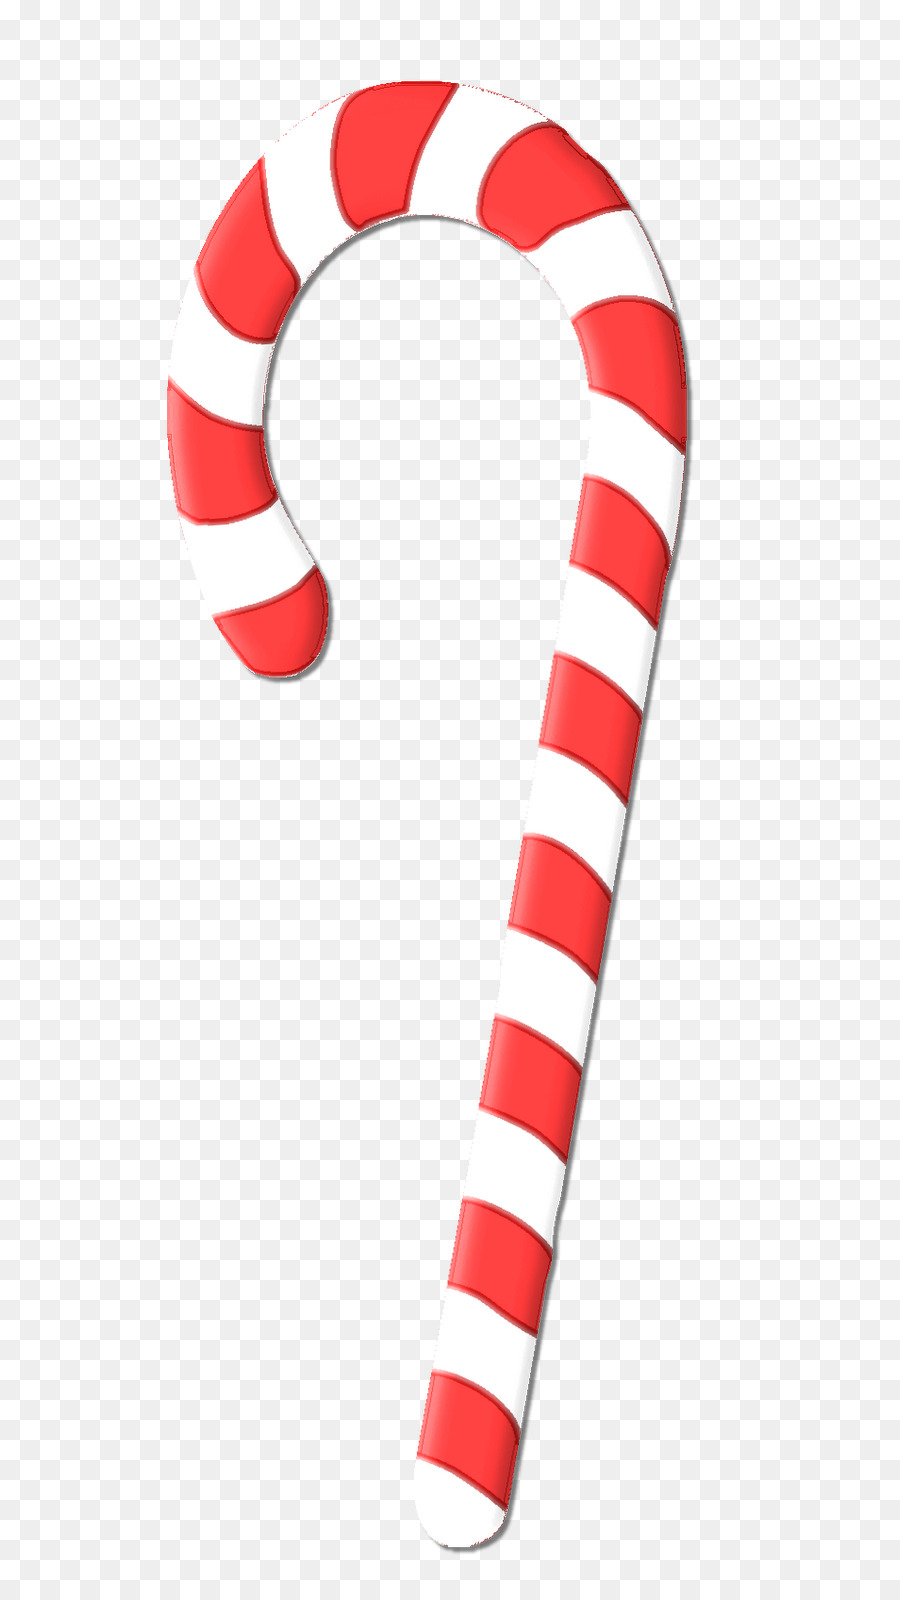 Candy cane Product Font Line - line png download - 795*1600 - Free Transparent Candy Cane png Download.